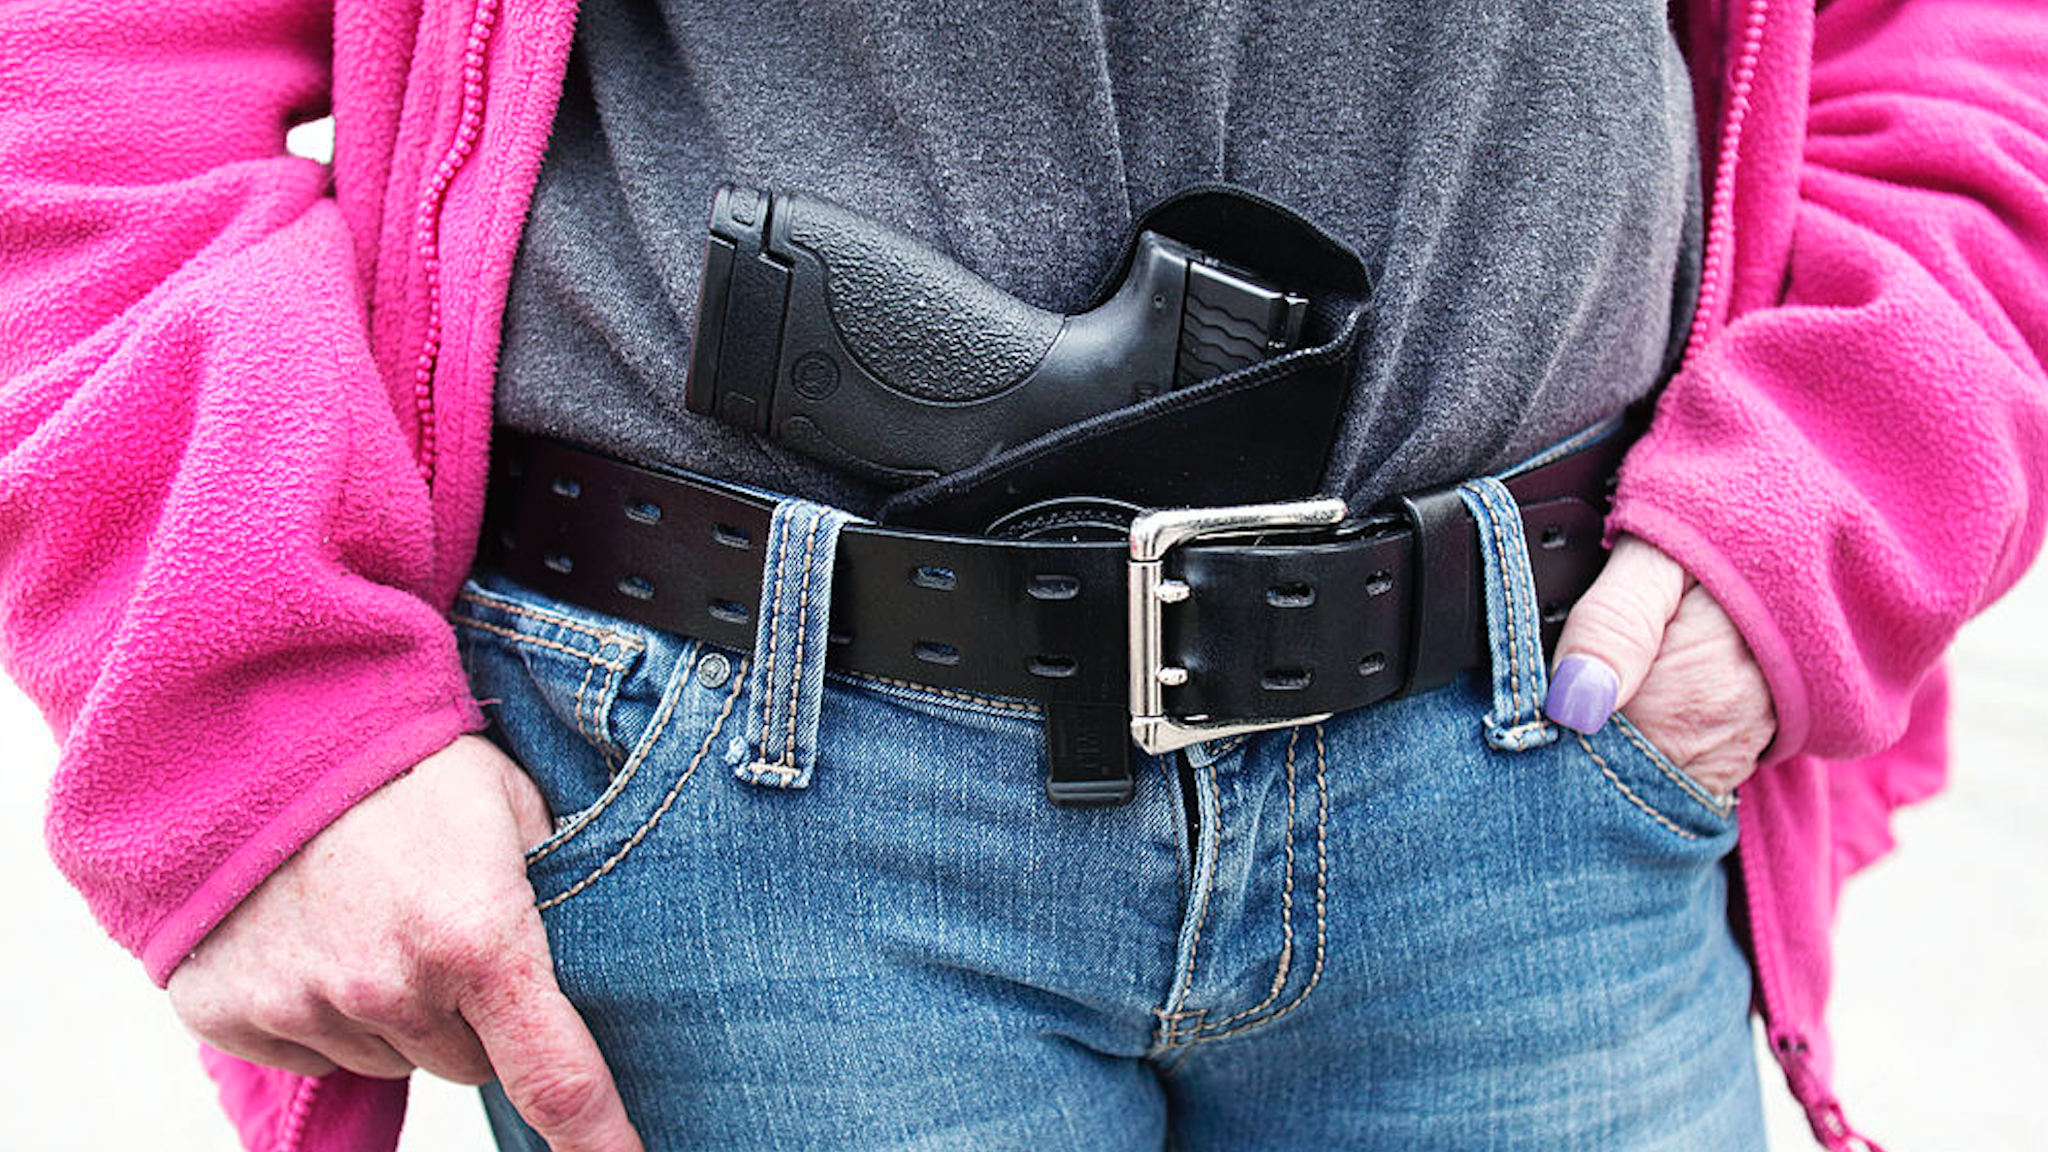 Gloria Lincoln-Thompson of Garden City, Michigan carries her Smith & Wesson Shield 9mm pistol in her belt while participating in a rally and march supporting Michigan's Open Carry law April 27, 2014 in Romulus, Michigan.